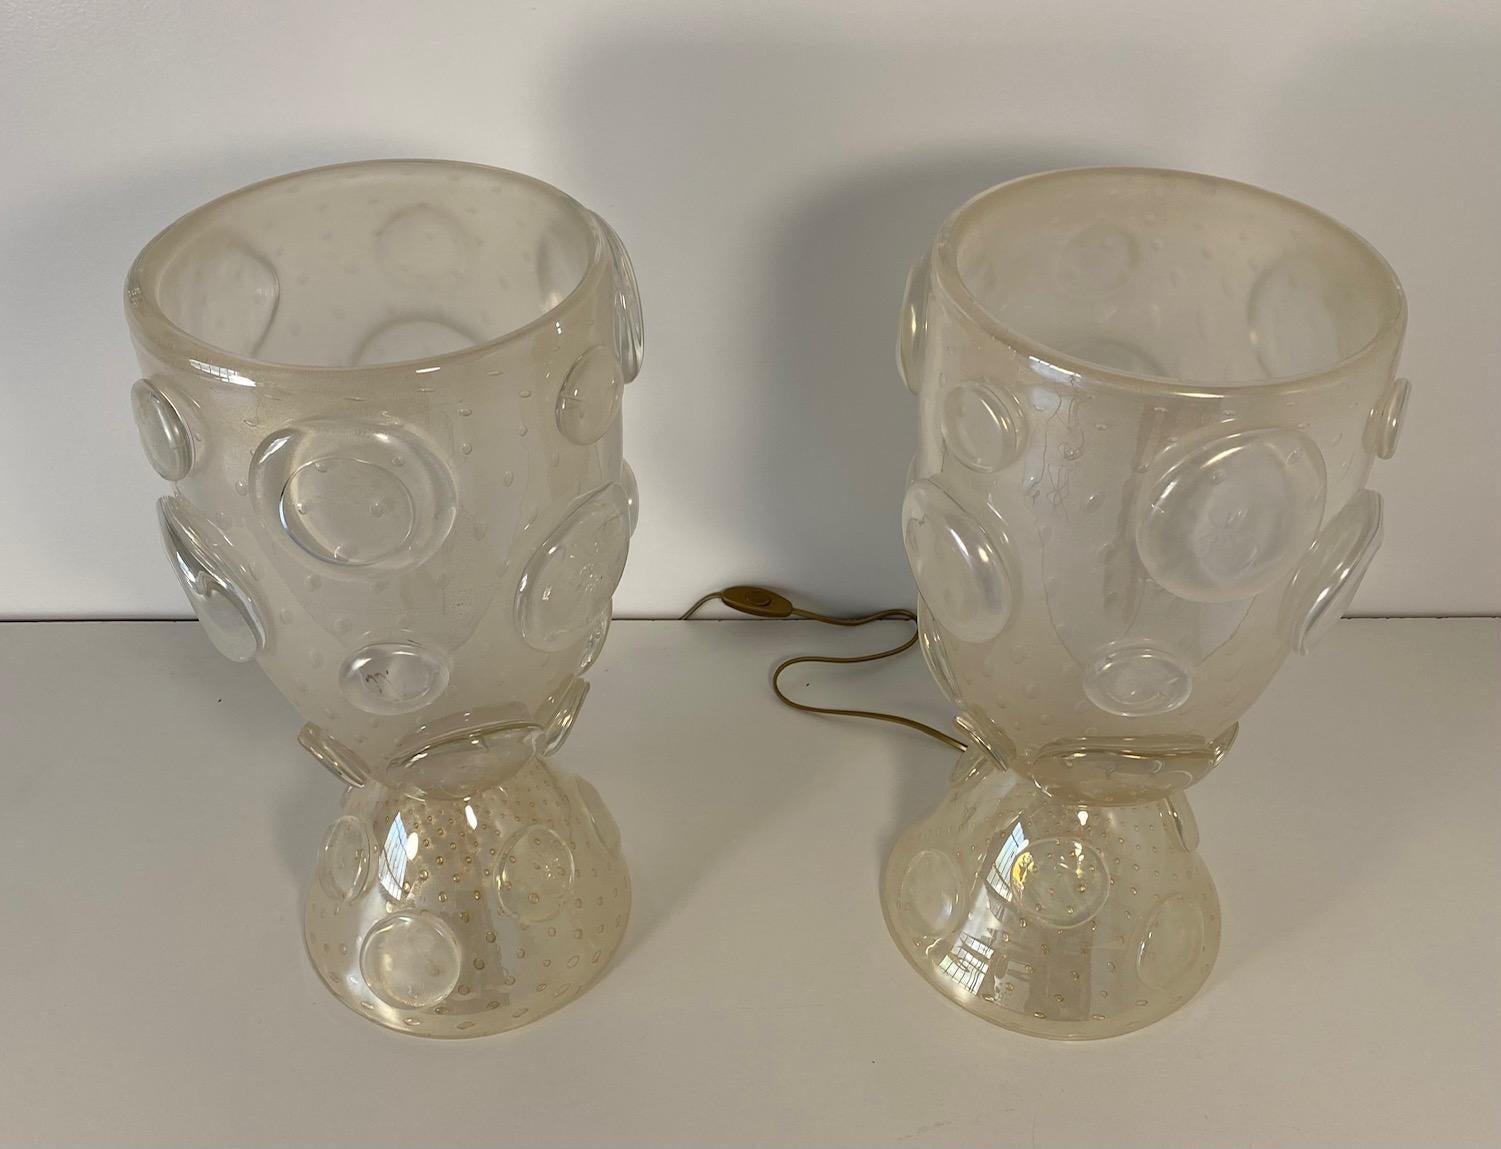 This pair of vase lamps was produced in Italy, in Murano the world's capital of glass making. 
They are completely made of white Murano glass, with gold bubbles inside of it. Also the decorative circles are made of the same particular Murano